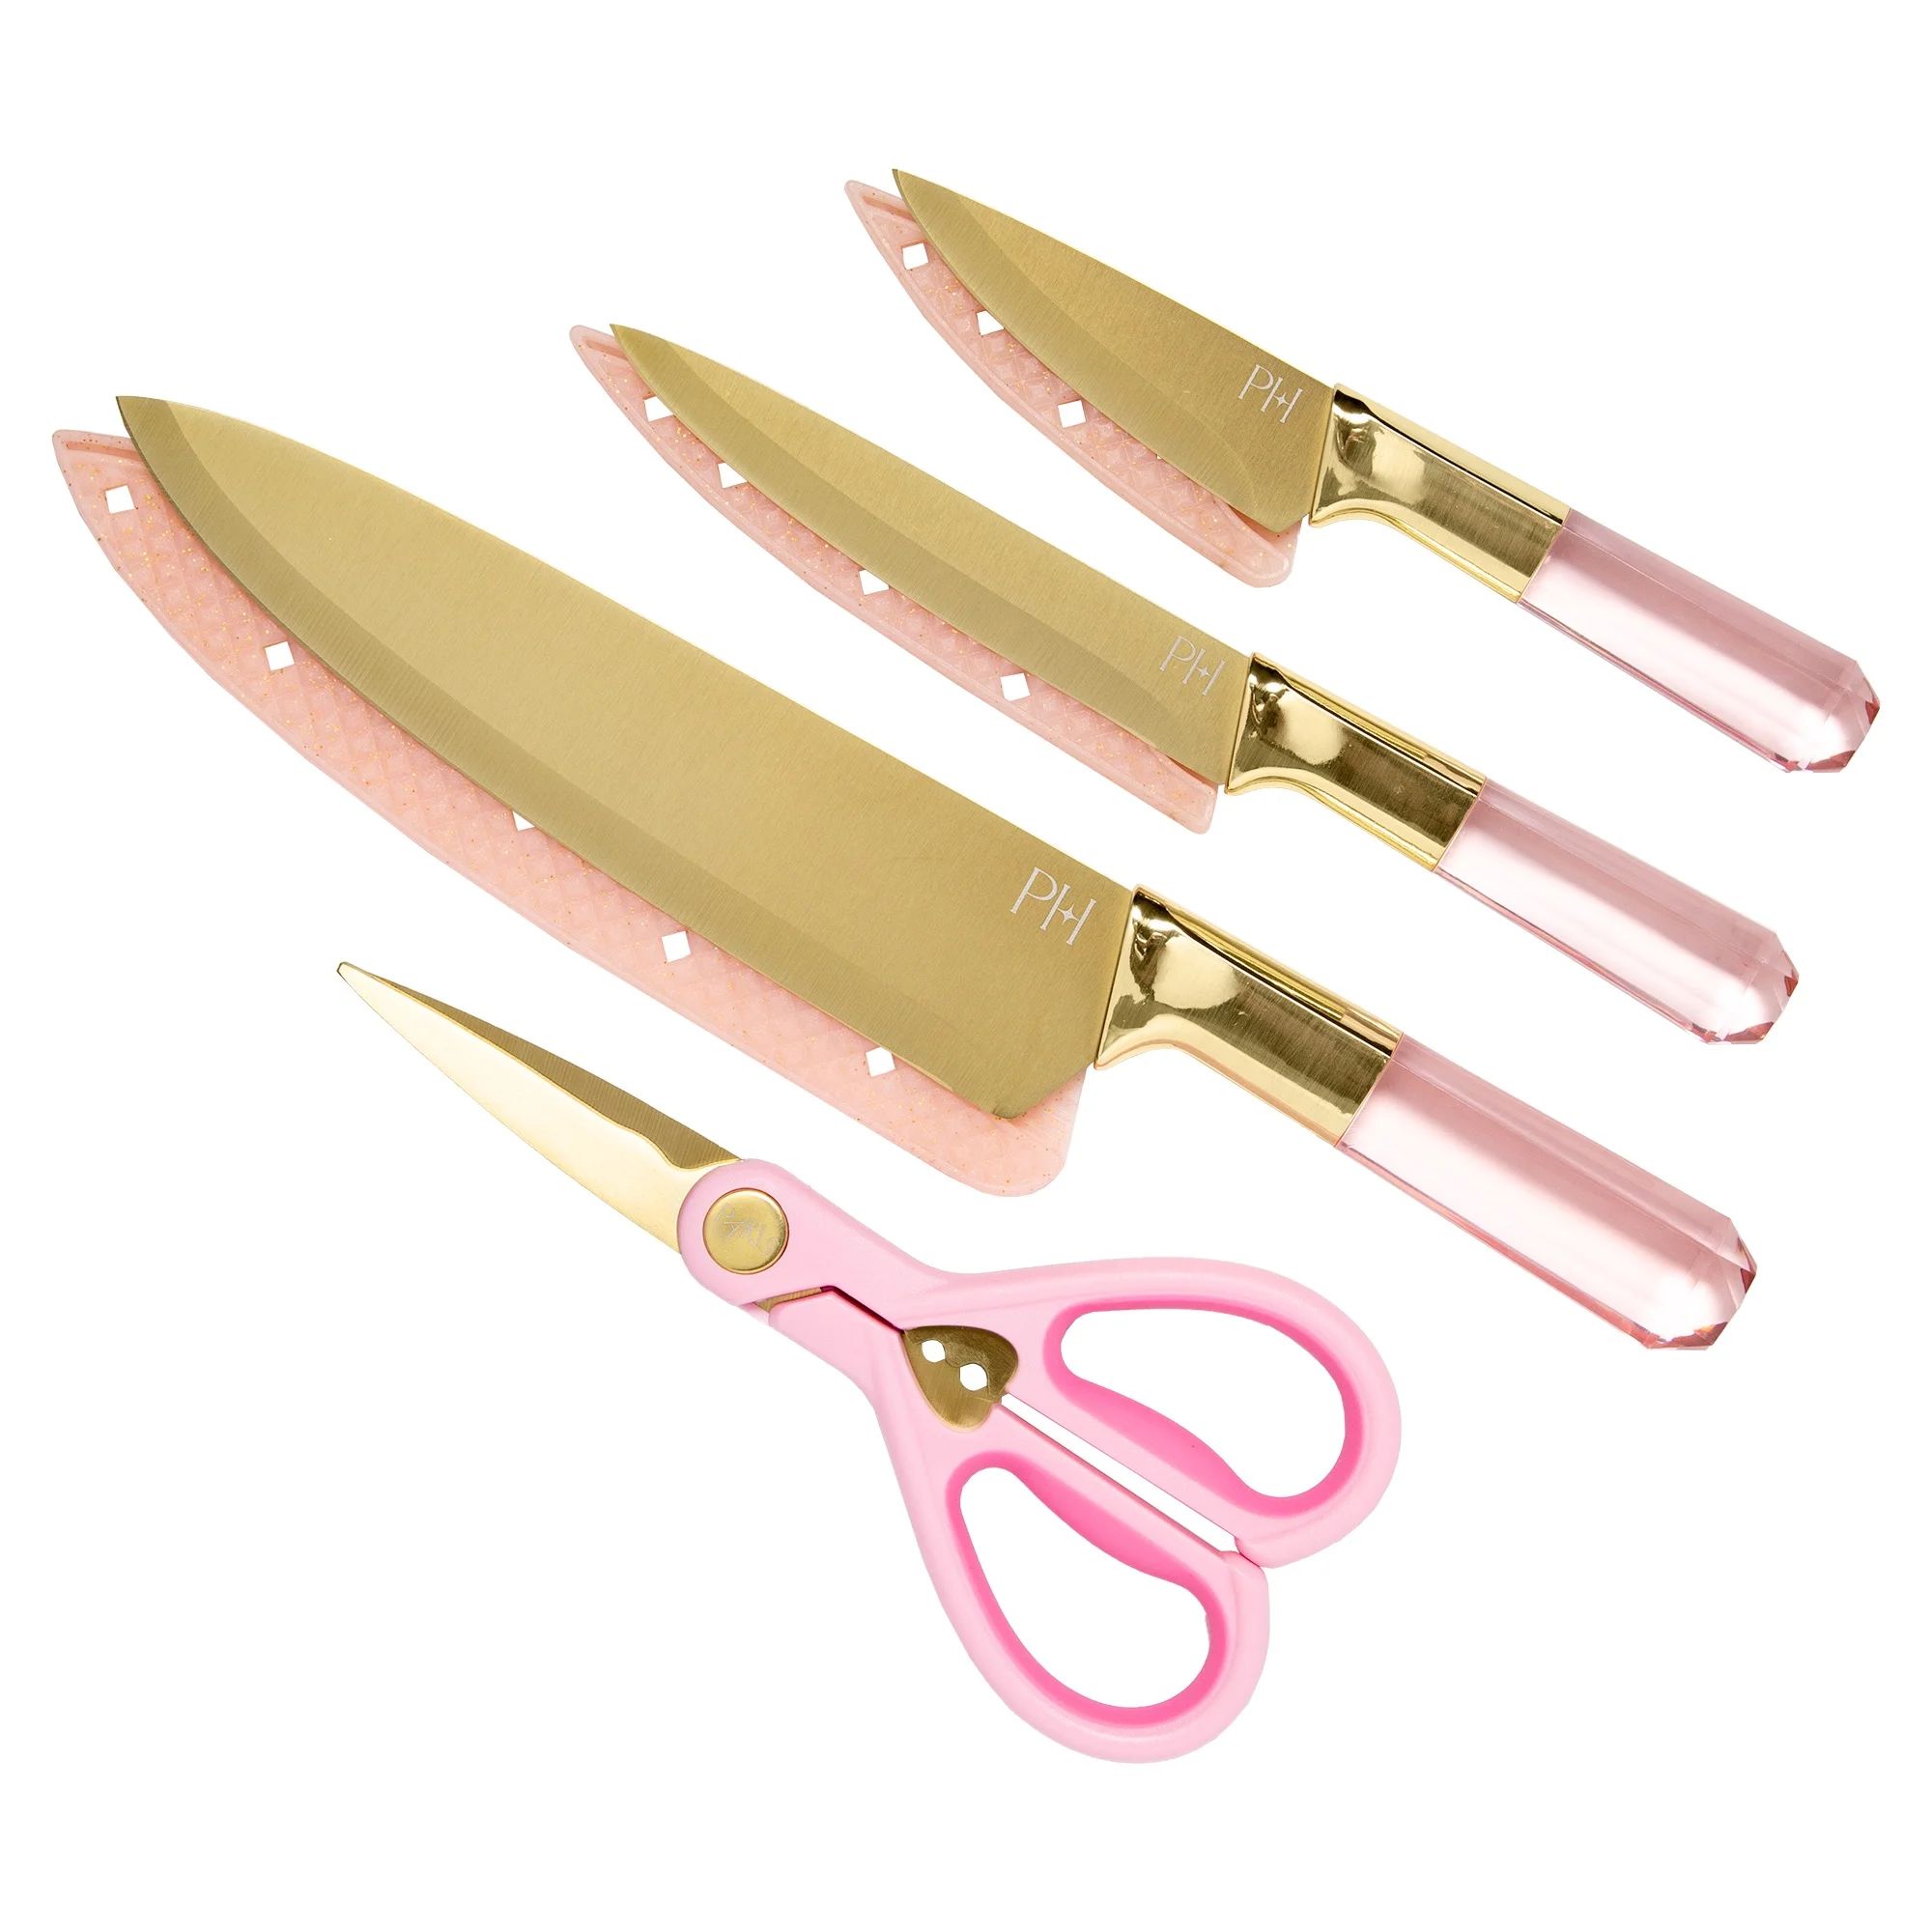 Paris Hilton 4 Piece Stainless Steel Cutlery Set, Jewel Shaped Handles with Gold Blades, Pink | Walmart (US)